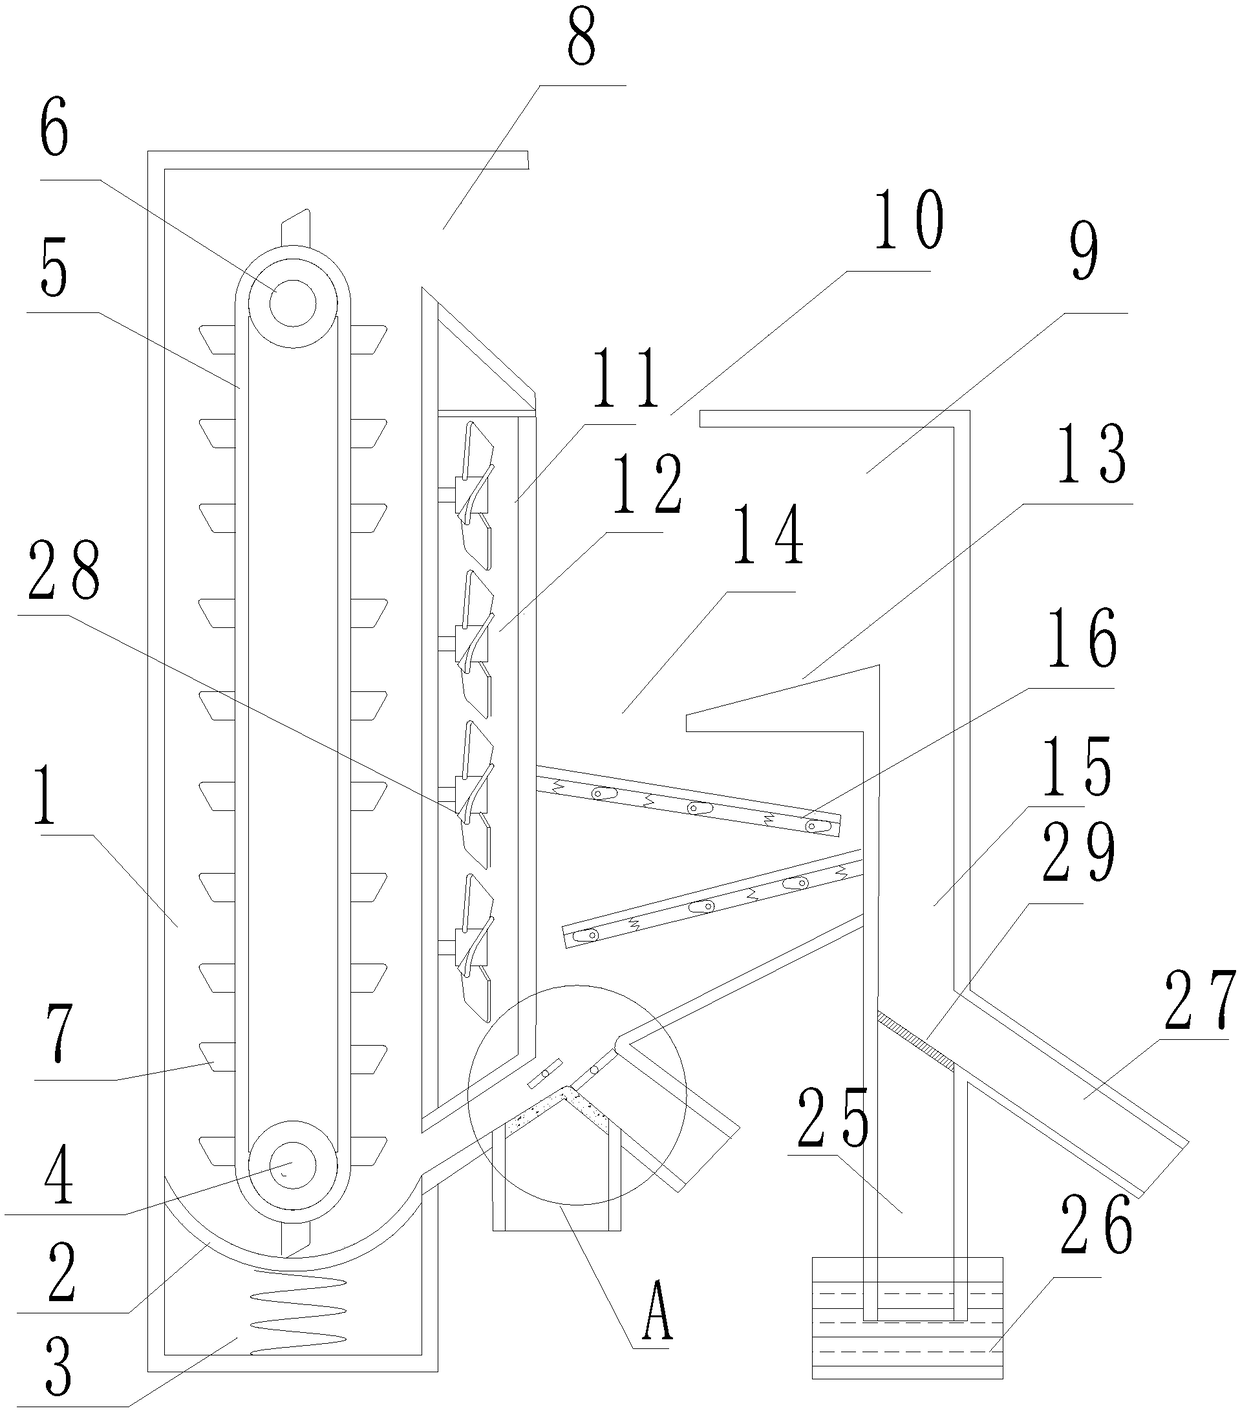 Rice drying and screening device